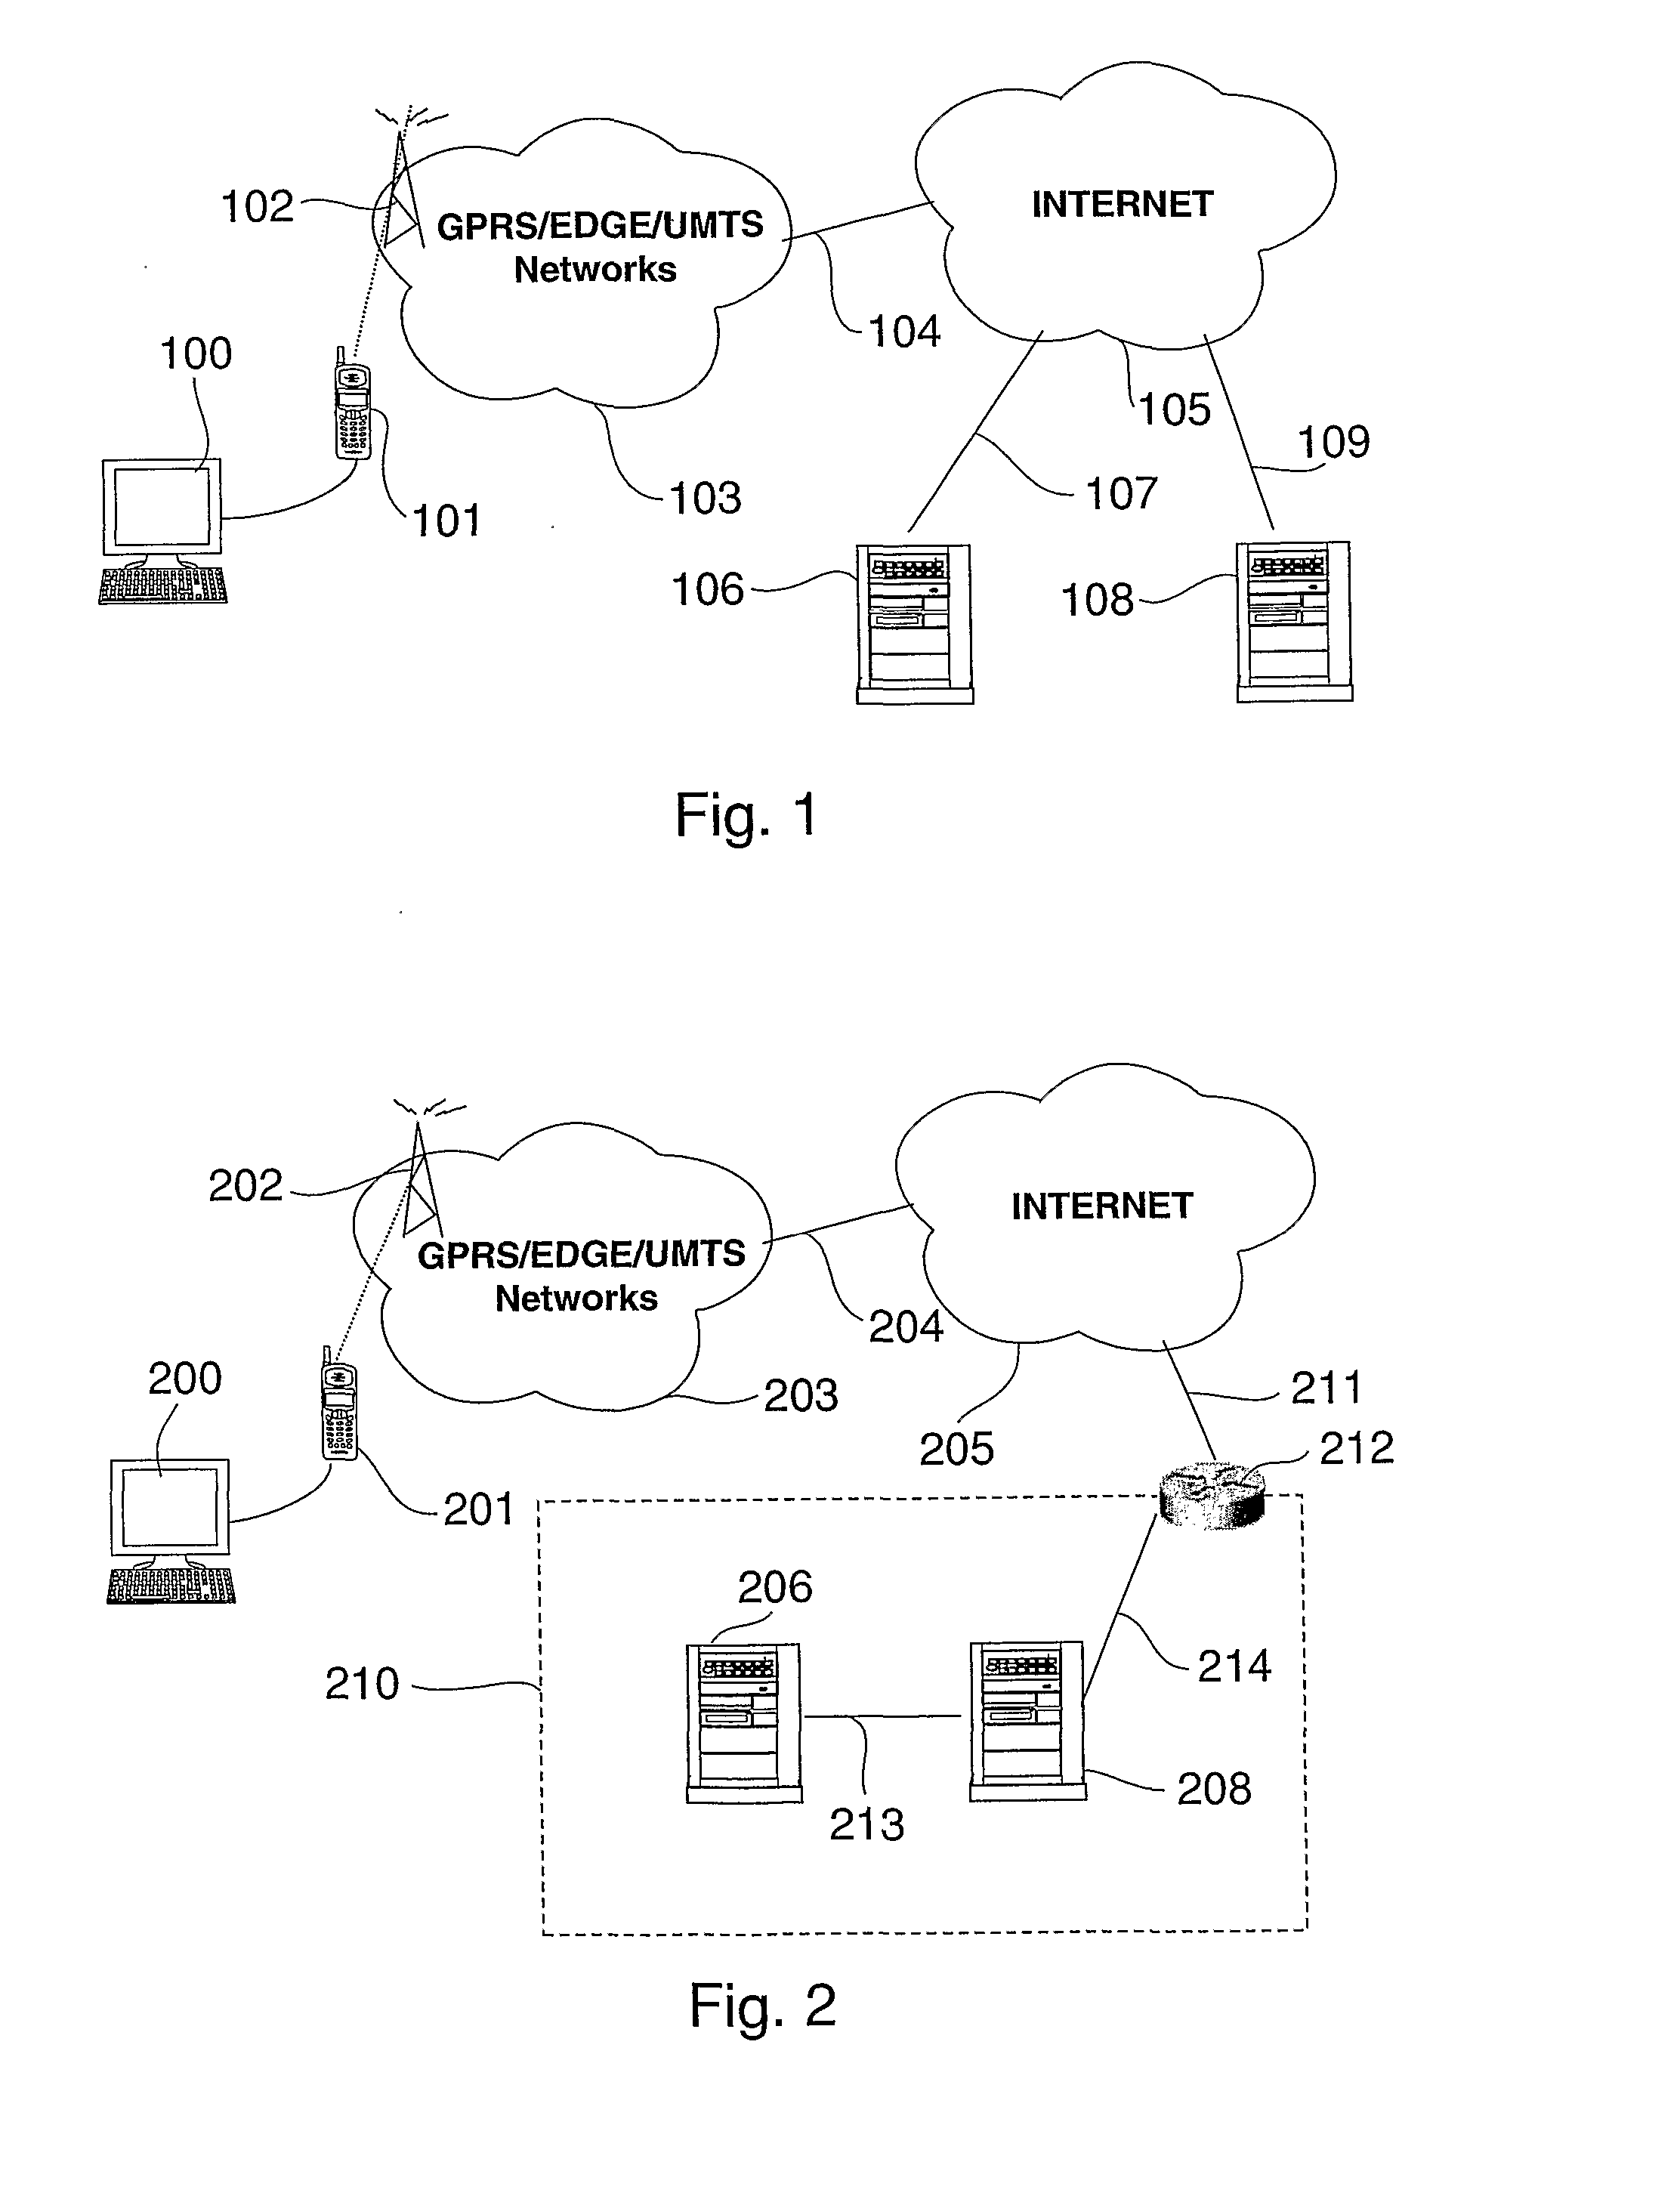 Method of Optimising Web Page Access in Wireless Networks